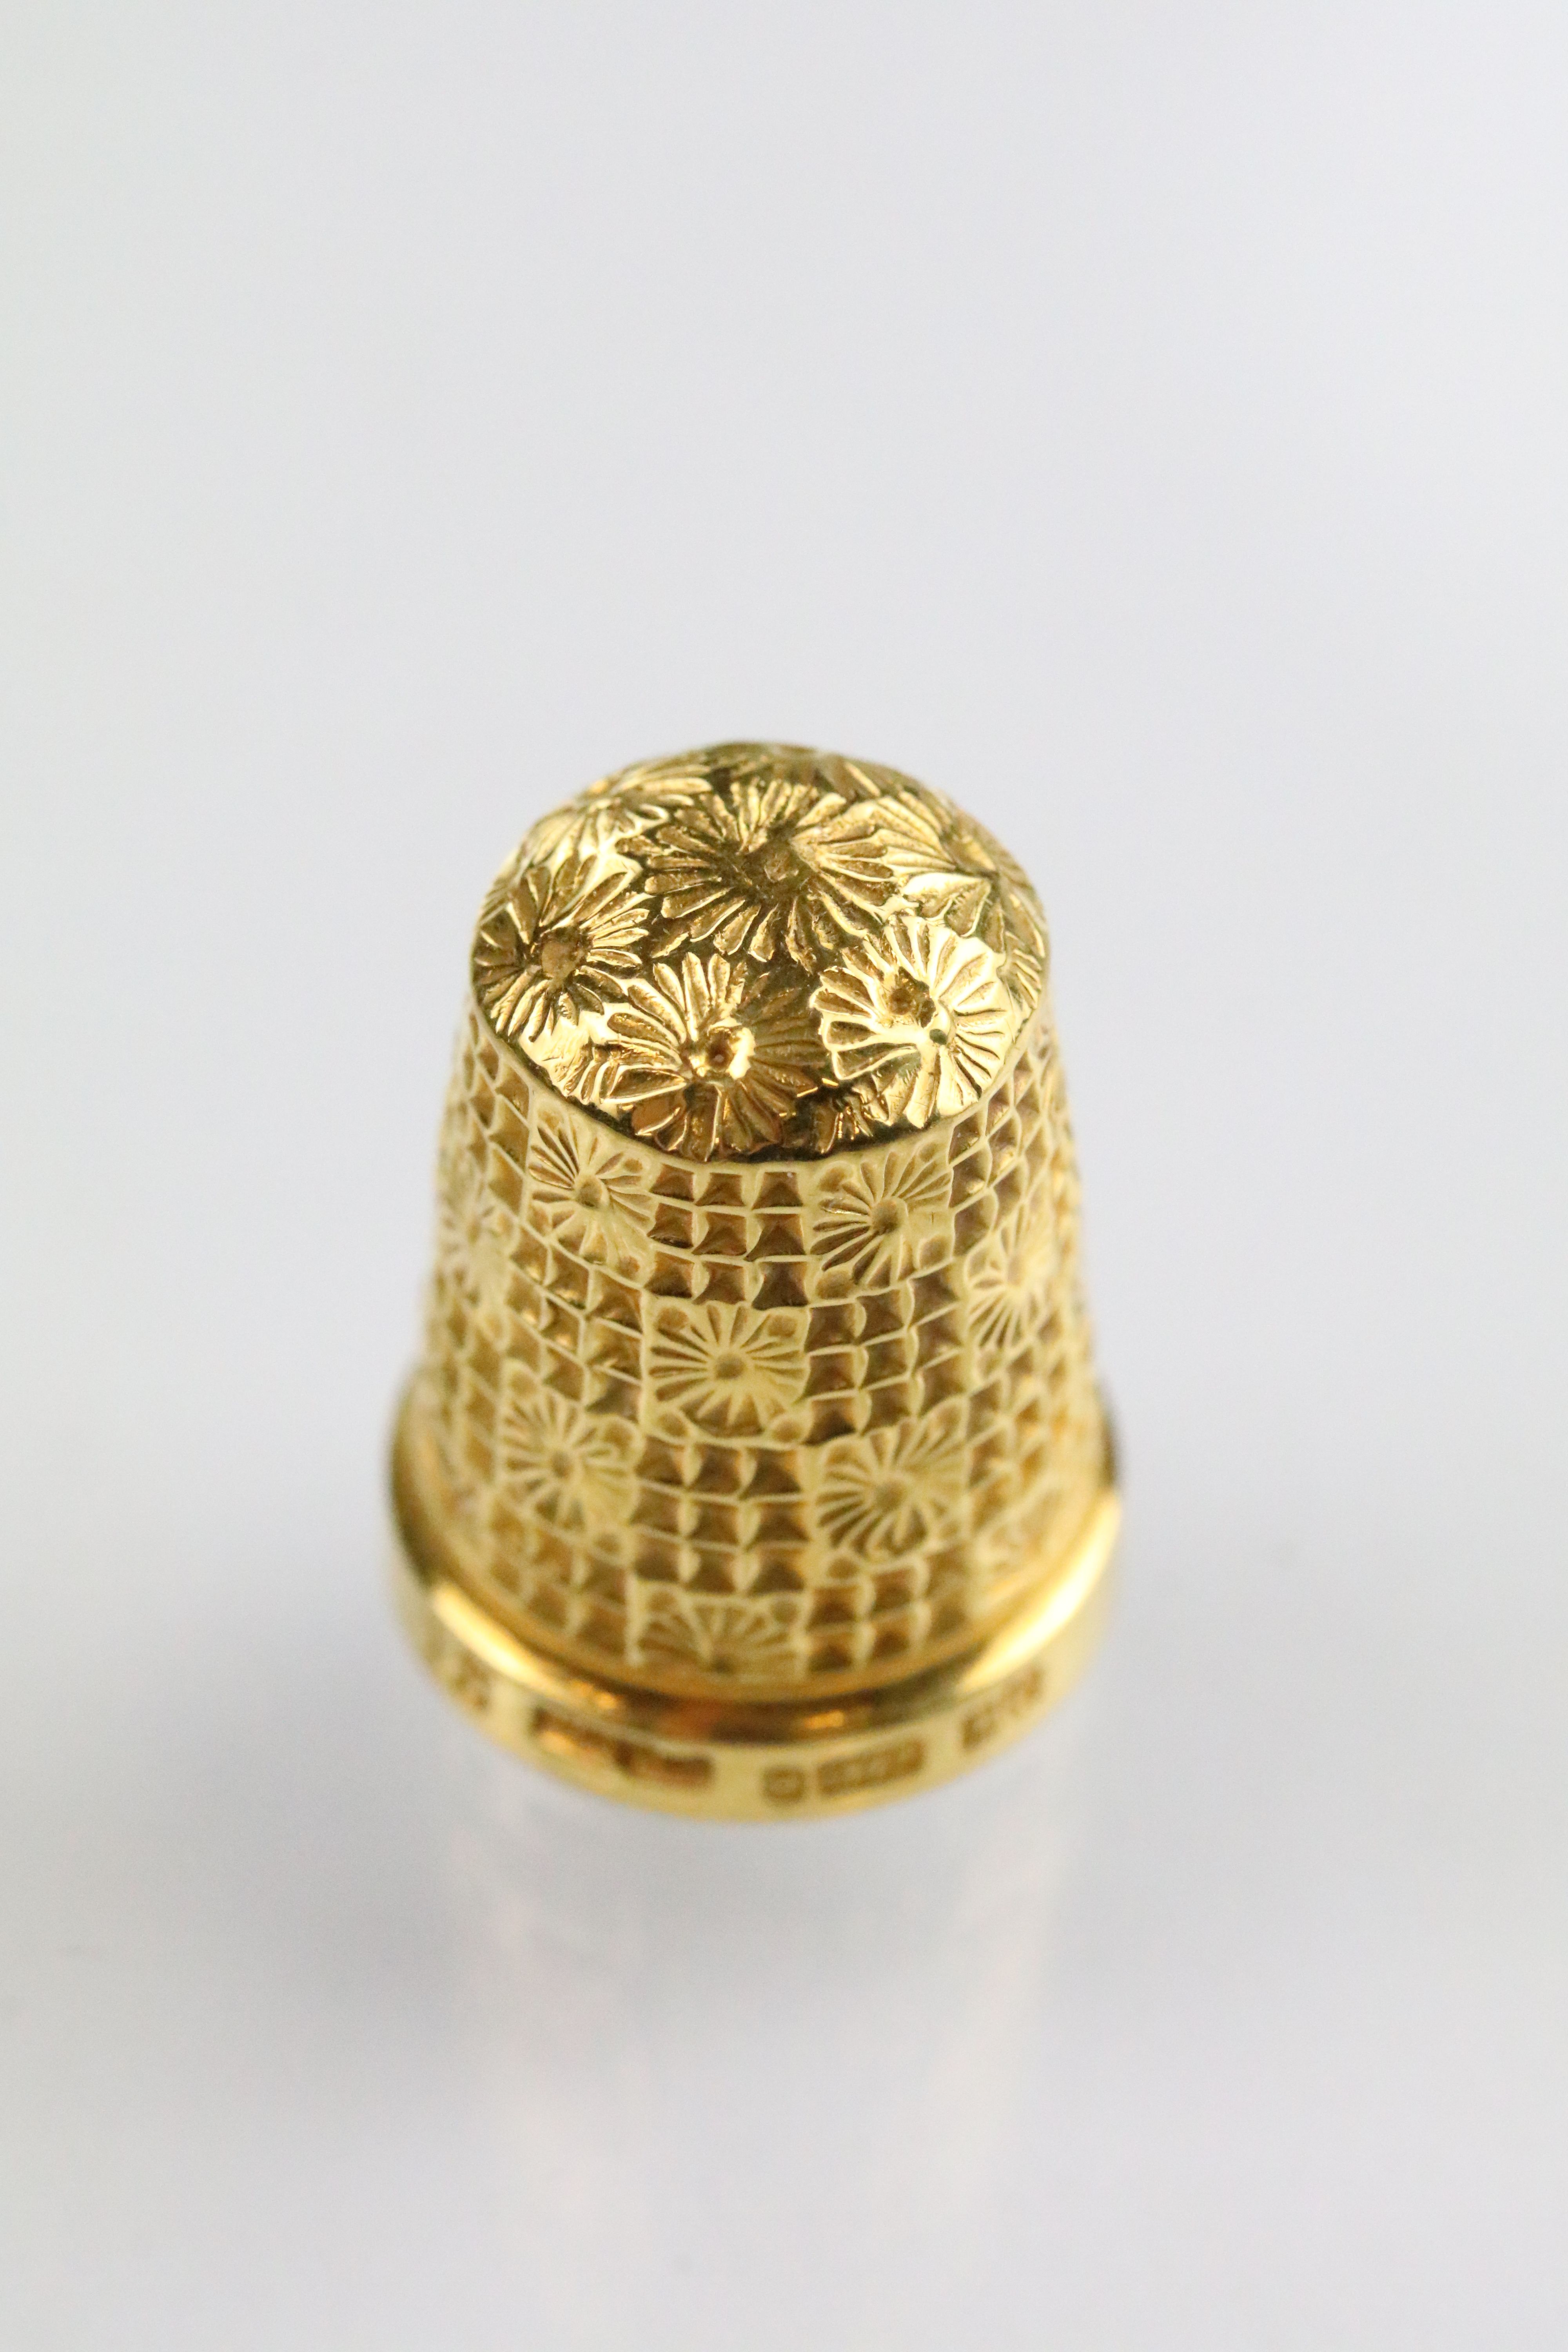 9ct gold hallmarked thimble with moulded details, size 15. Hallmarked Birmingham 1902, HG & S Ltd. - Image 2 of 4